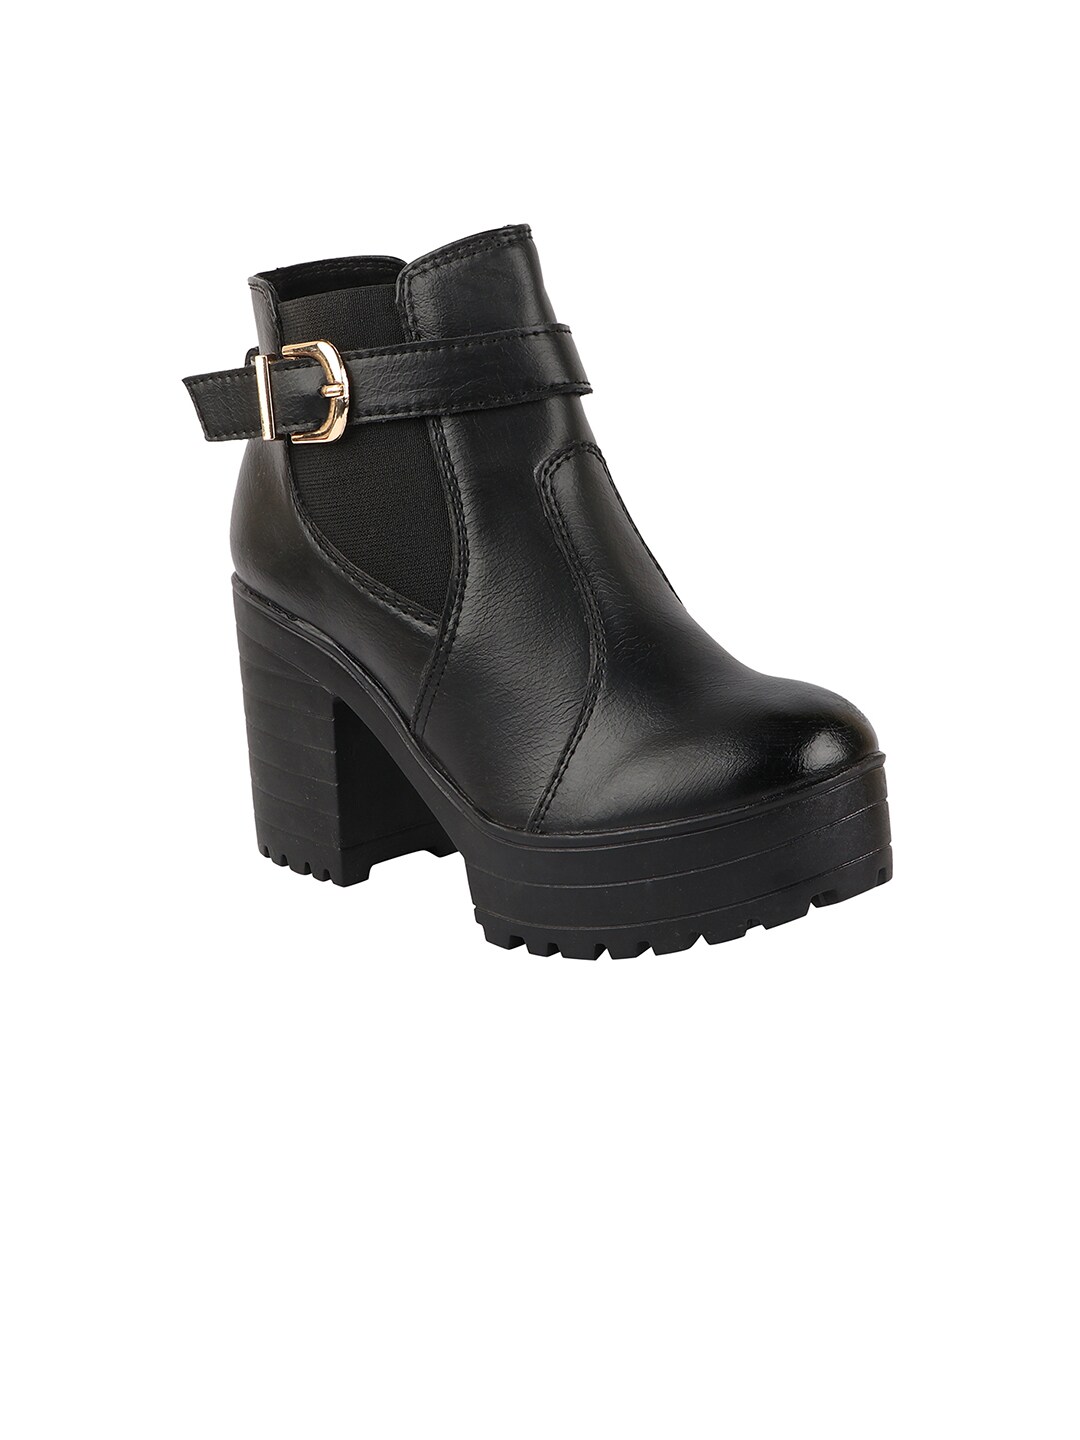 Shoetopia Black Platform Heeled Boots with Buckles Price in India